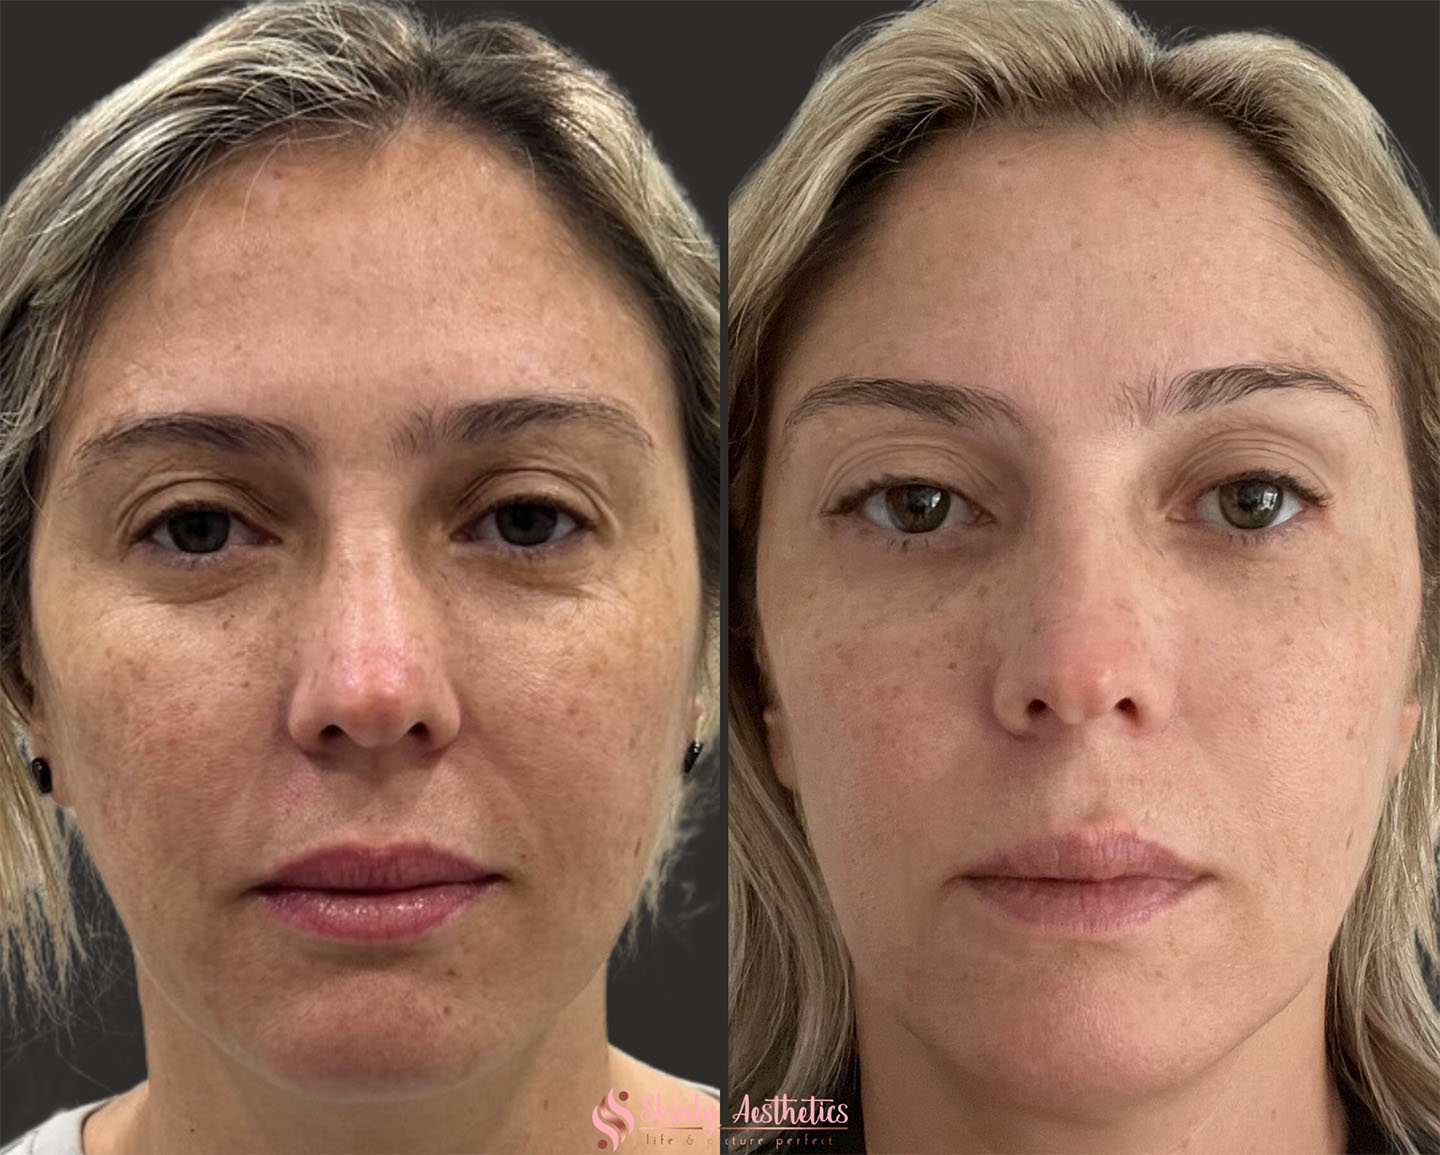 Before and after results of non-surgical blepharoplasty after 3 Pure Plasma treatments